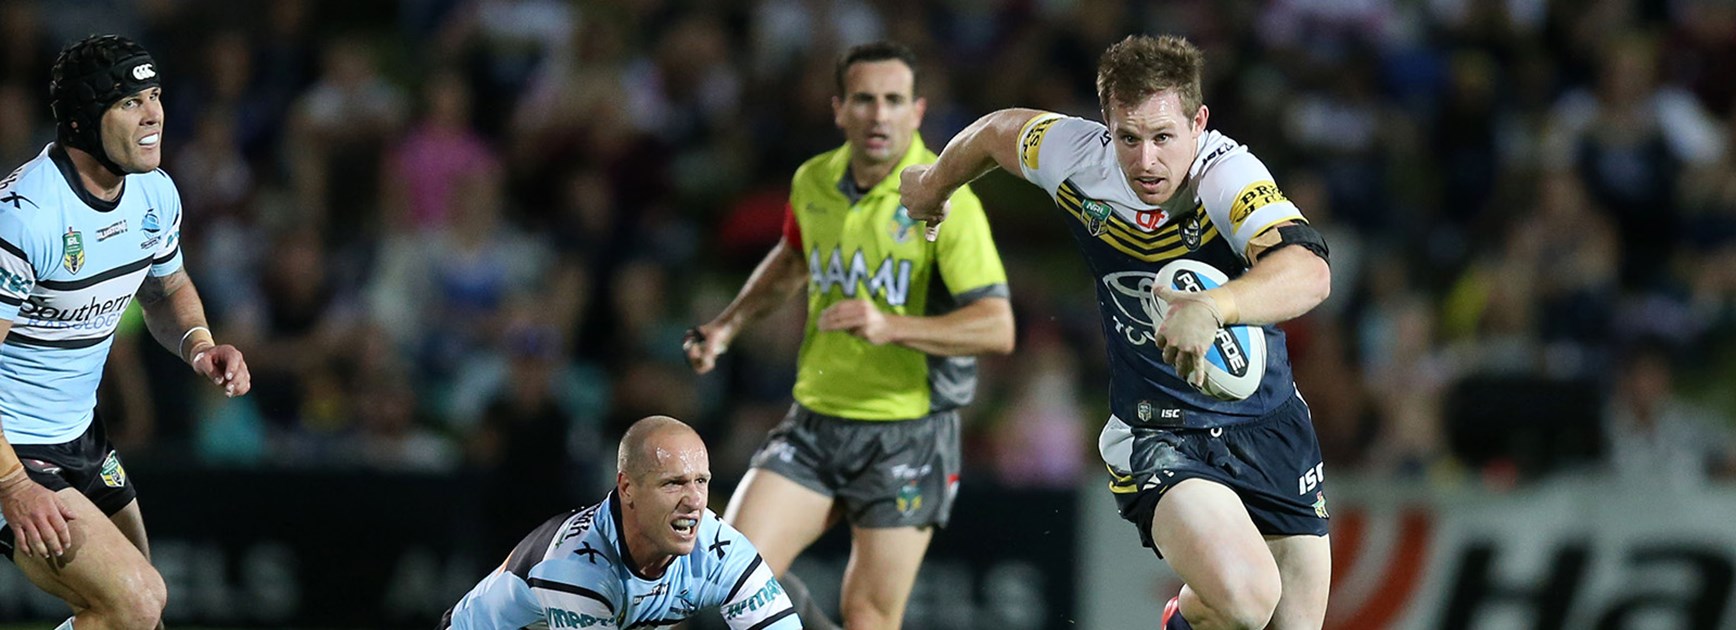 Cowboys five-eighth Michael Morgan played a starring role in his side's semi-final win over the Sharks.